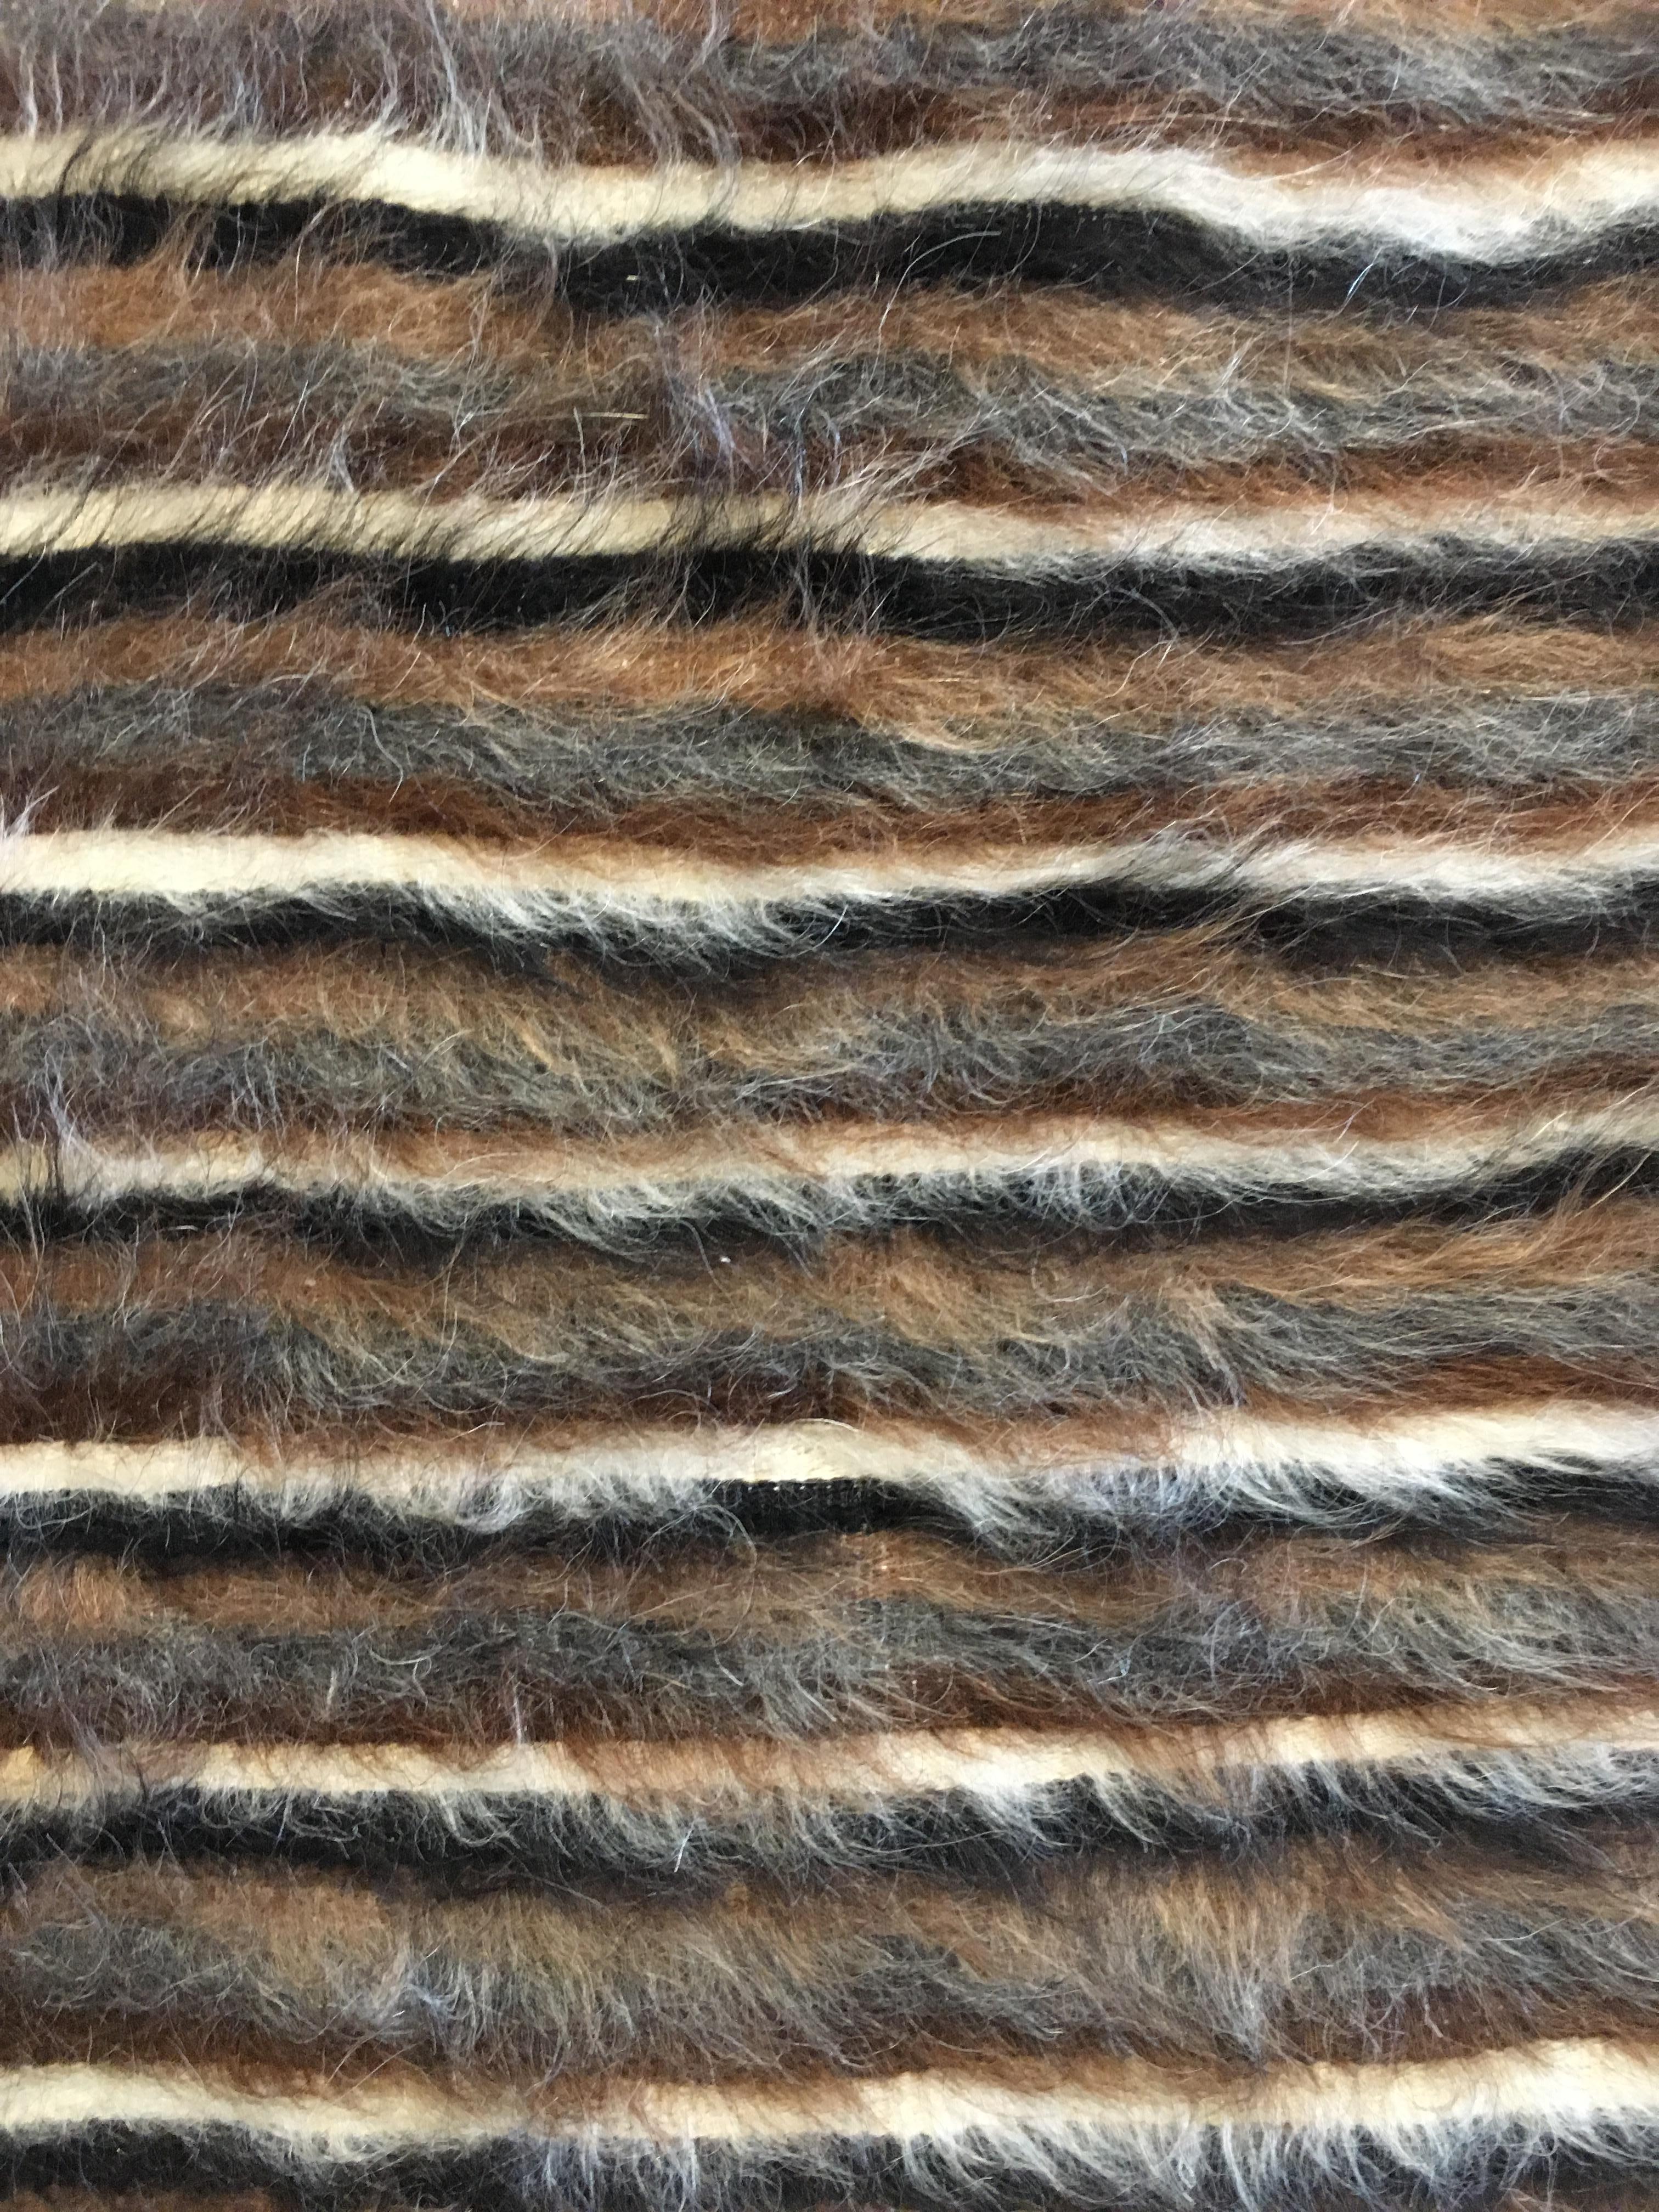 Hand woven in Eastern Turkey, this brand new small rug has a cotton foundation and a soft goat hair (mahair) pile made of all natural, undyed colors of black brown and ivory. 
It is very soft and floppy therefor it can also be used as a bed cover,